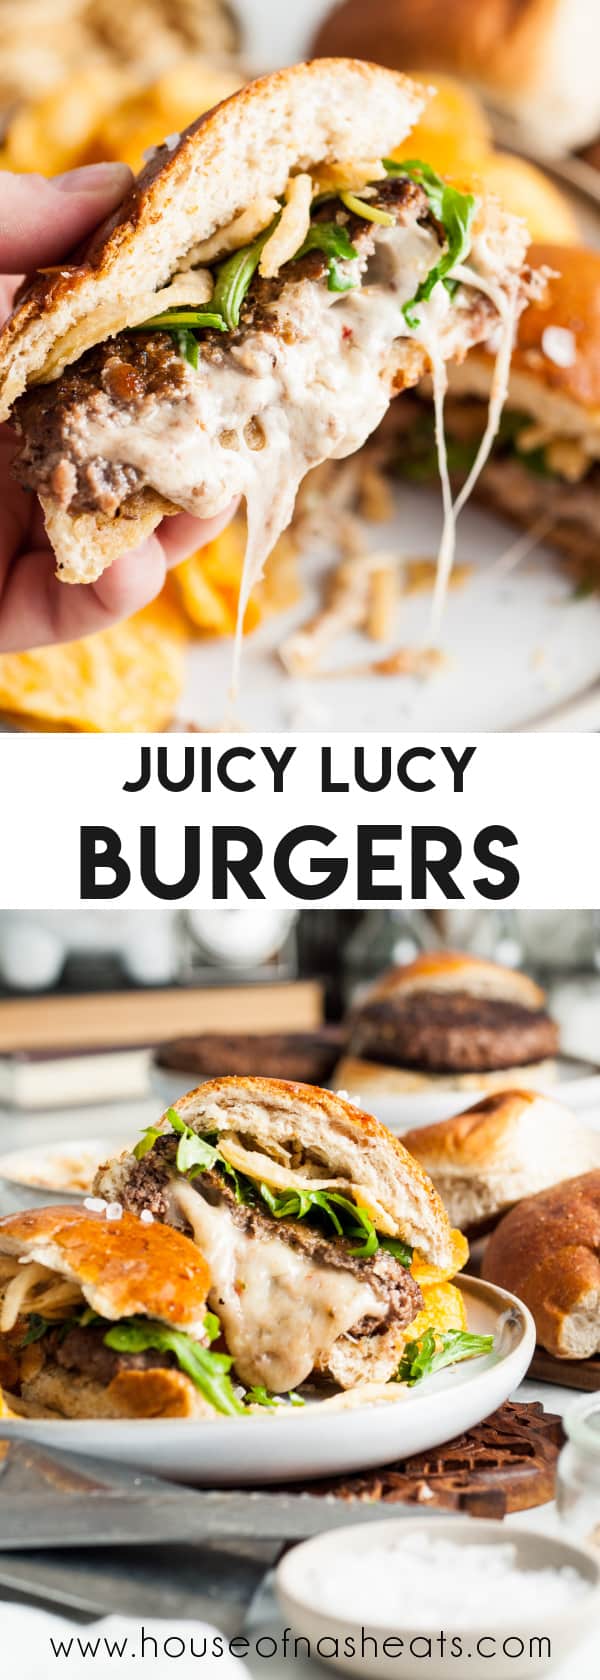 A collage of images of juicy Lucy burgers with text overlay.